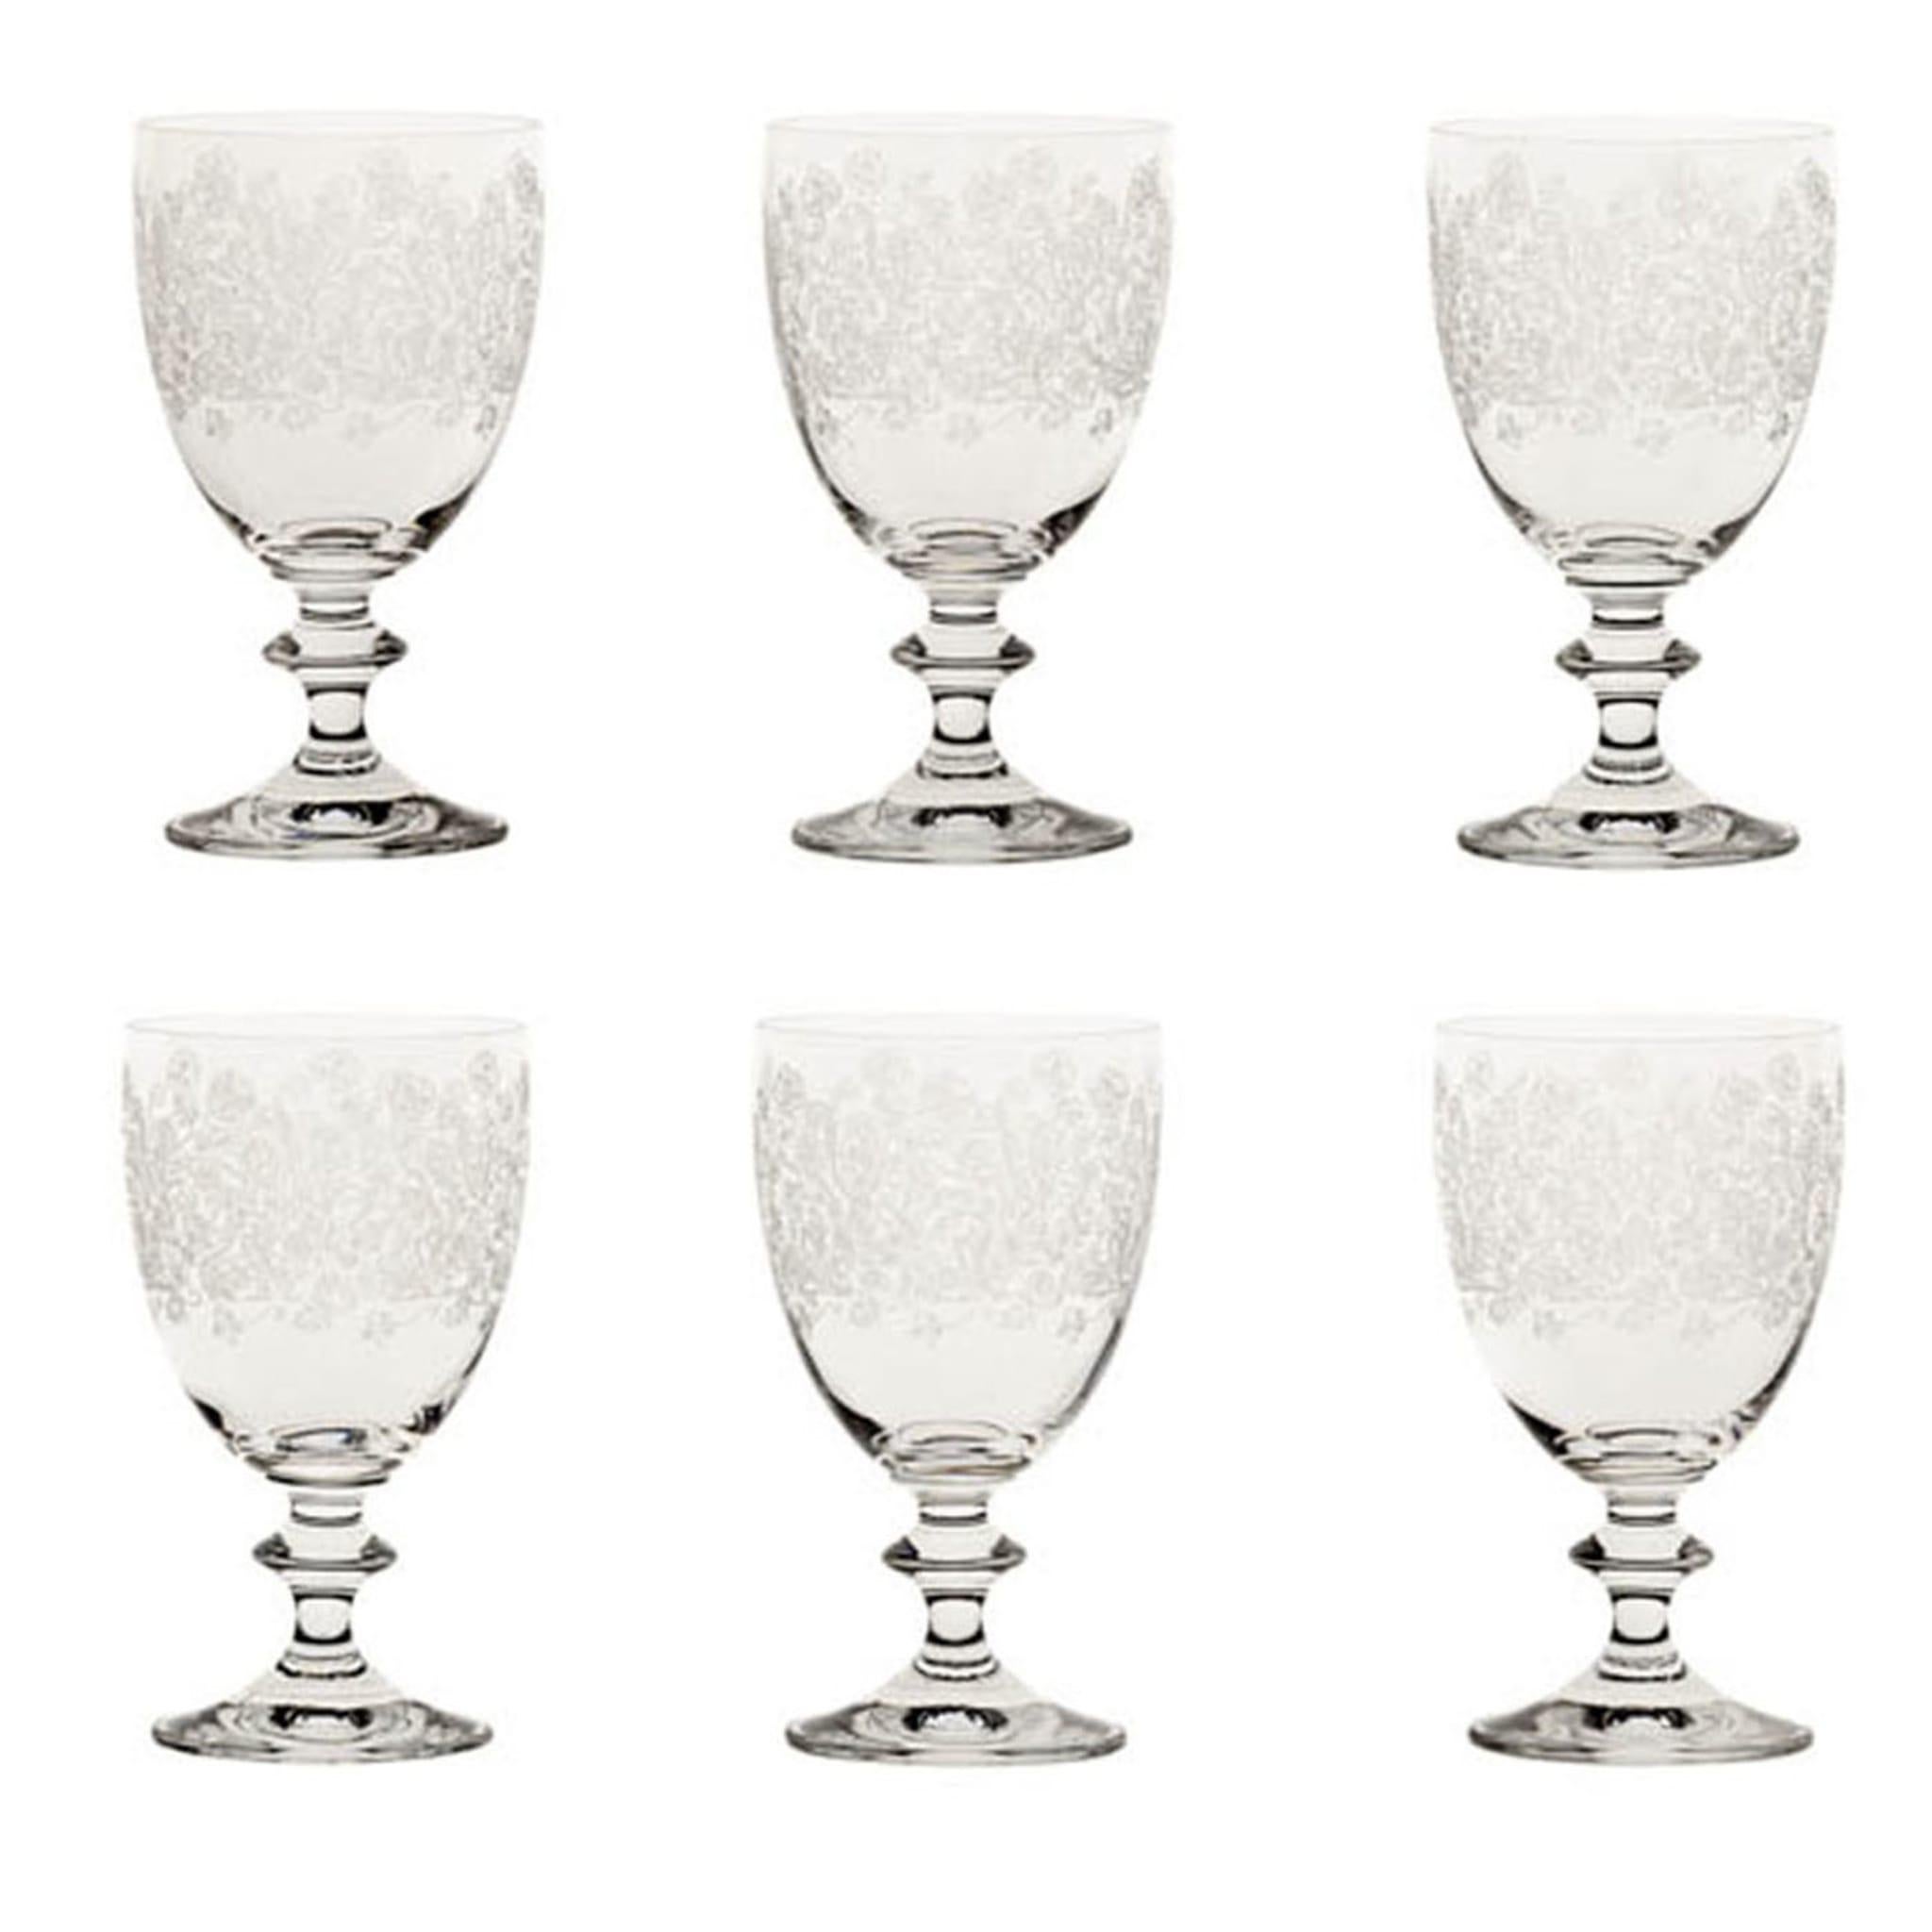 The pantographic etching decoration on these 6 wine glasses adds a touch of elegance to this exquisitely crafted set.